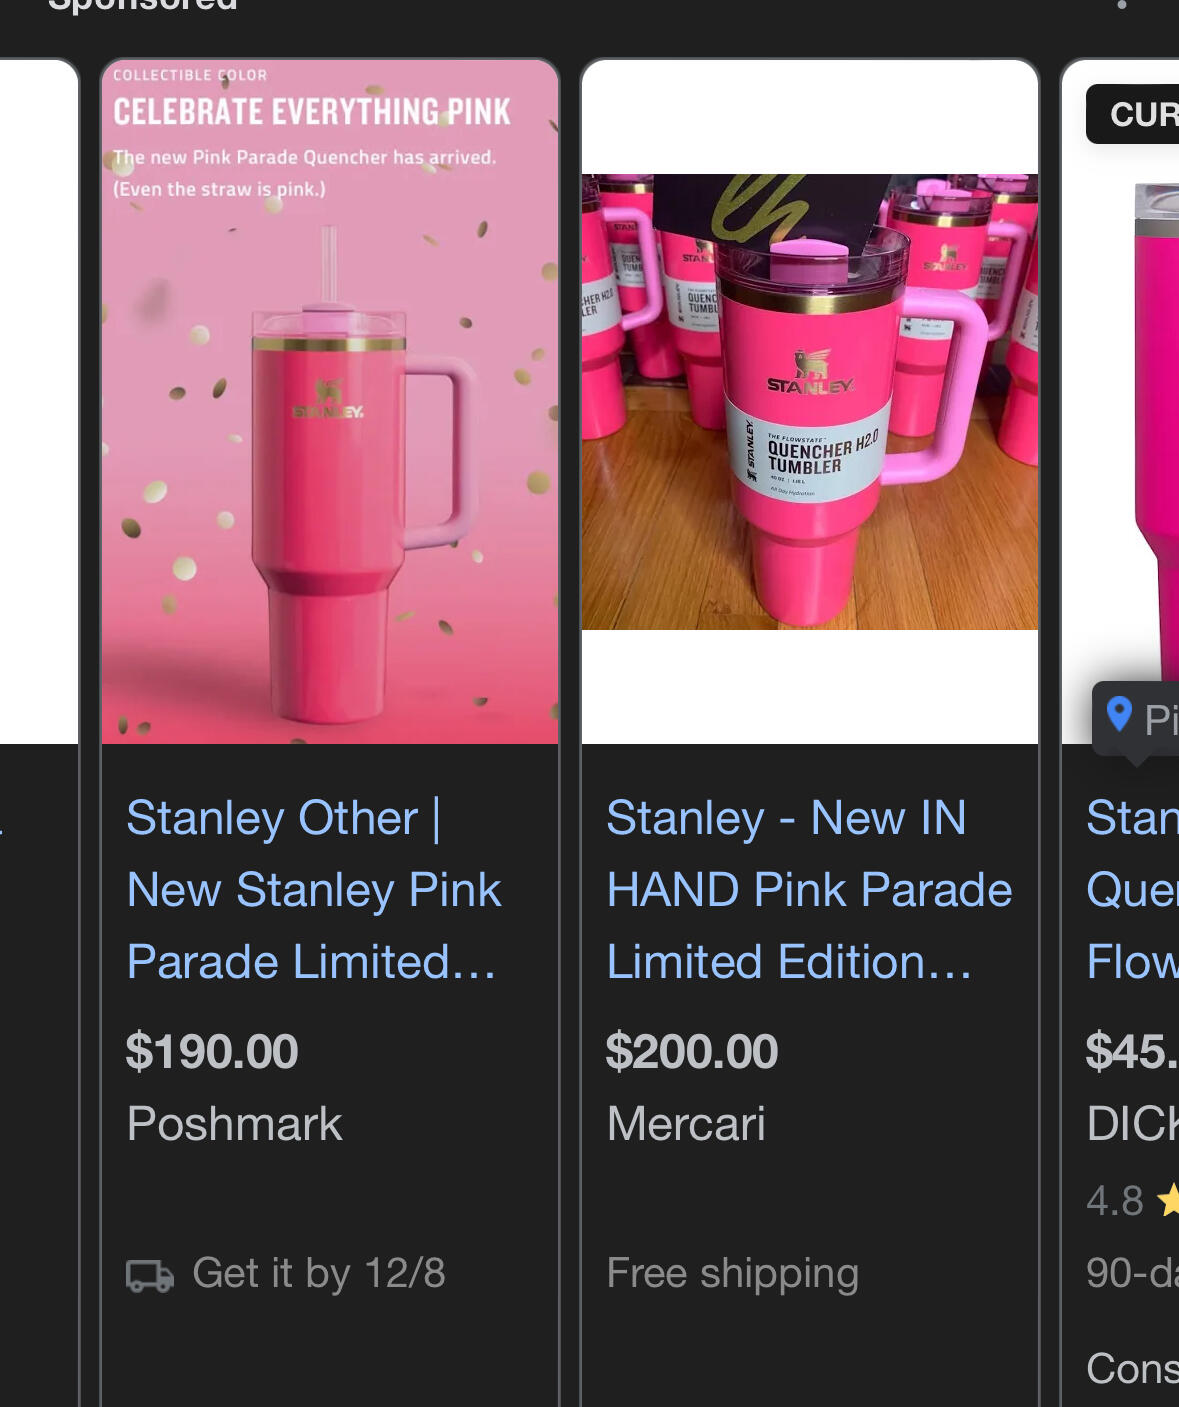 Black Friday Edition- Pink Parade Stanley For $150 In Castle Rock, CO